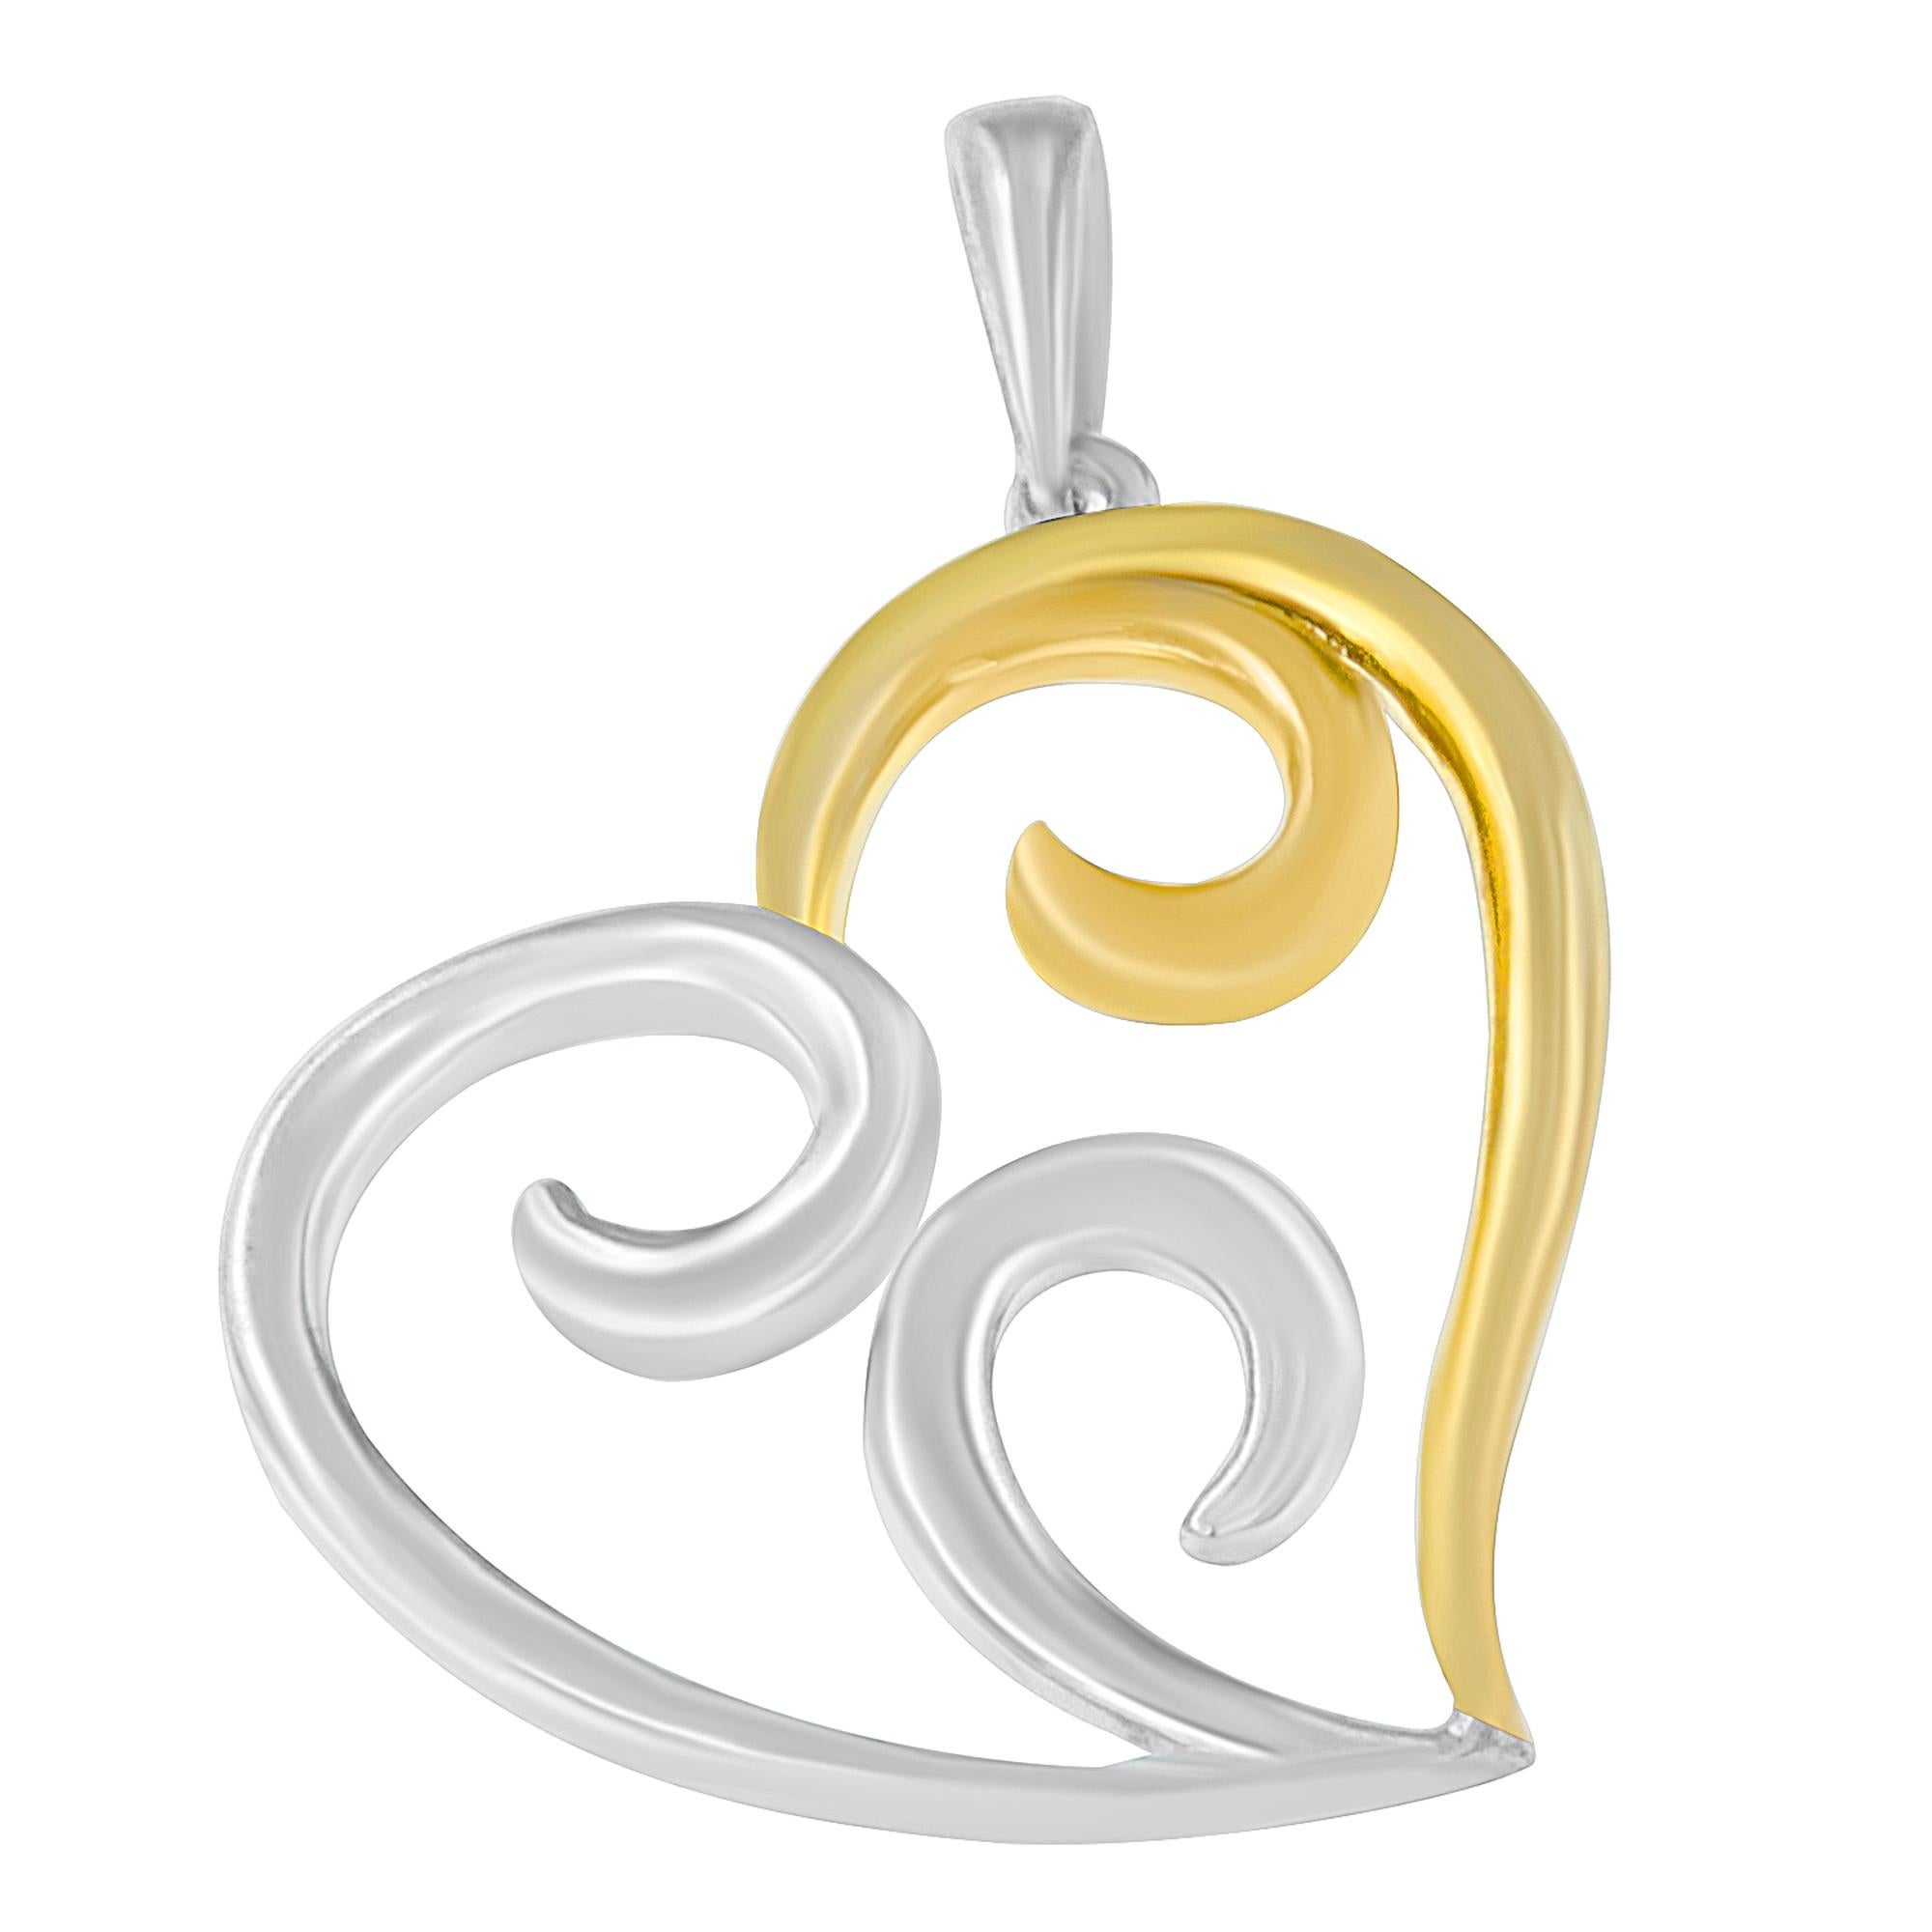 Celebrate someone you love with this stunning heart pendant. This pendant necklace features a flared open heart shape with swirls entering the center of the heart. The pendant comes with a slender 18” box chain for a sleek and modern look. It is